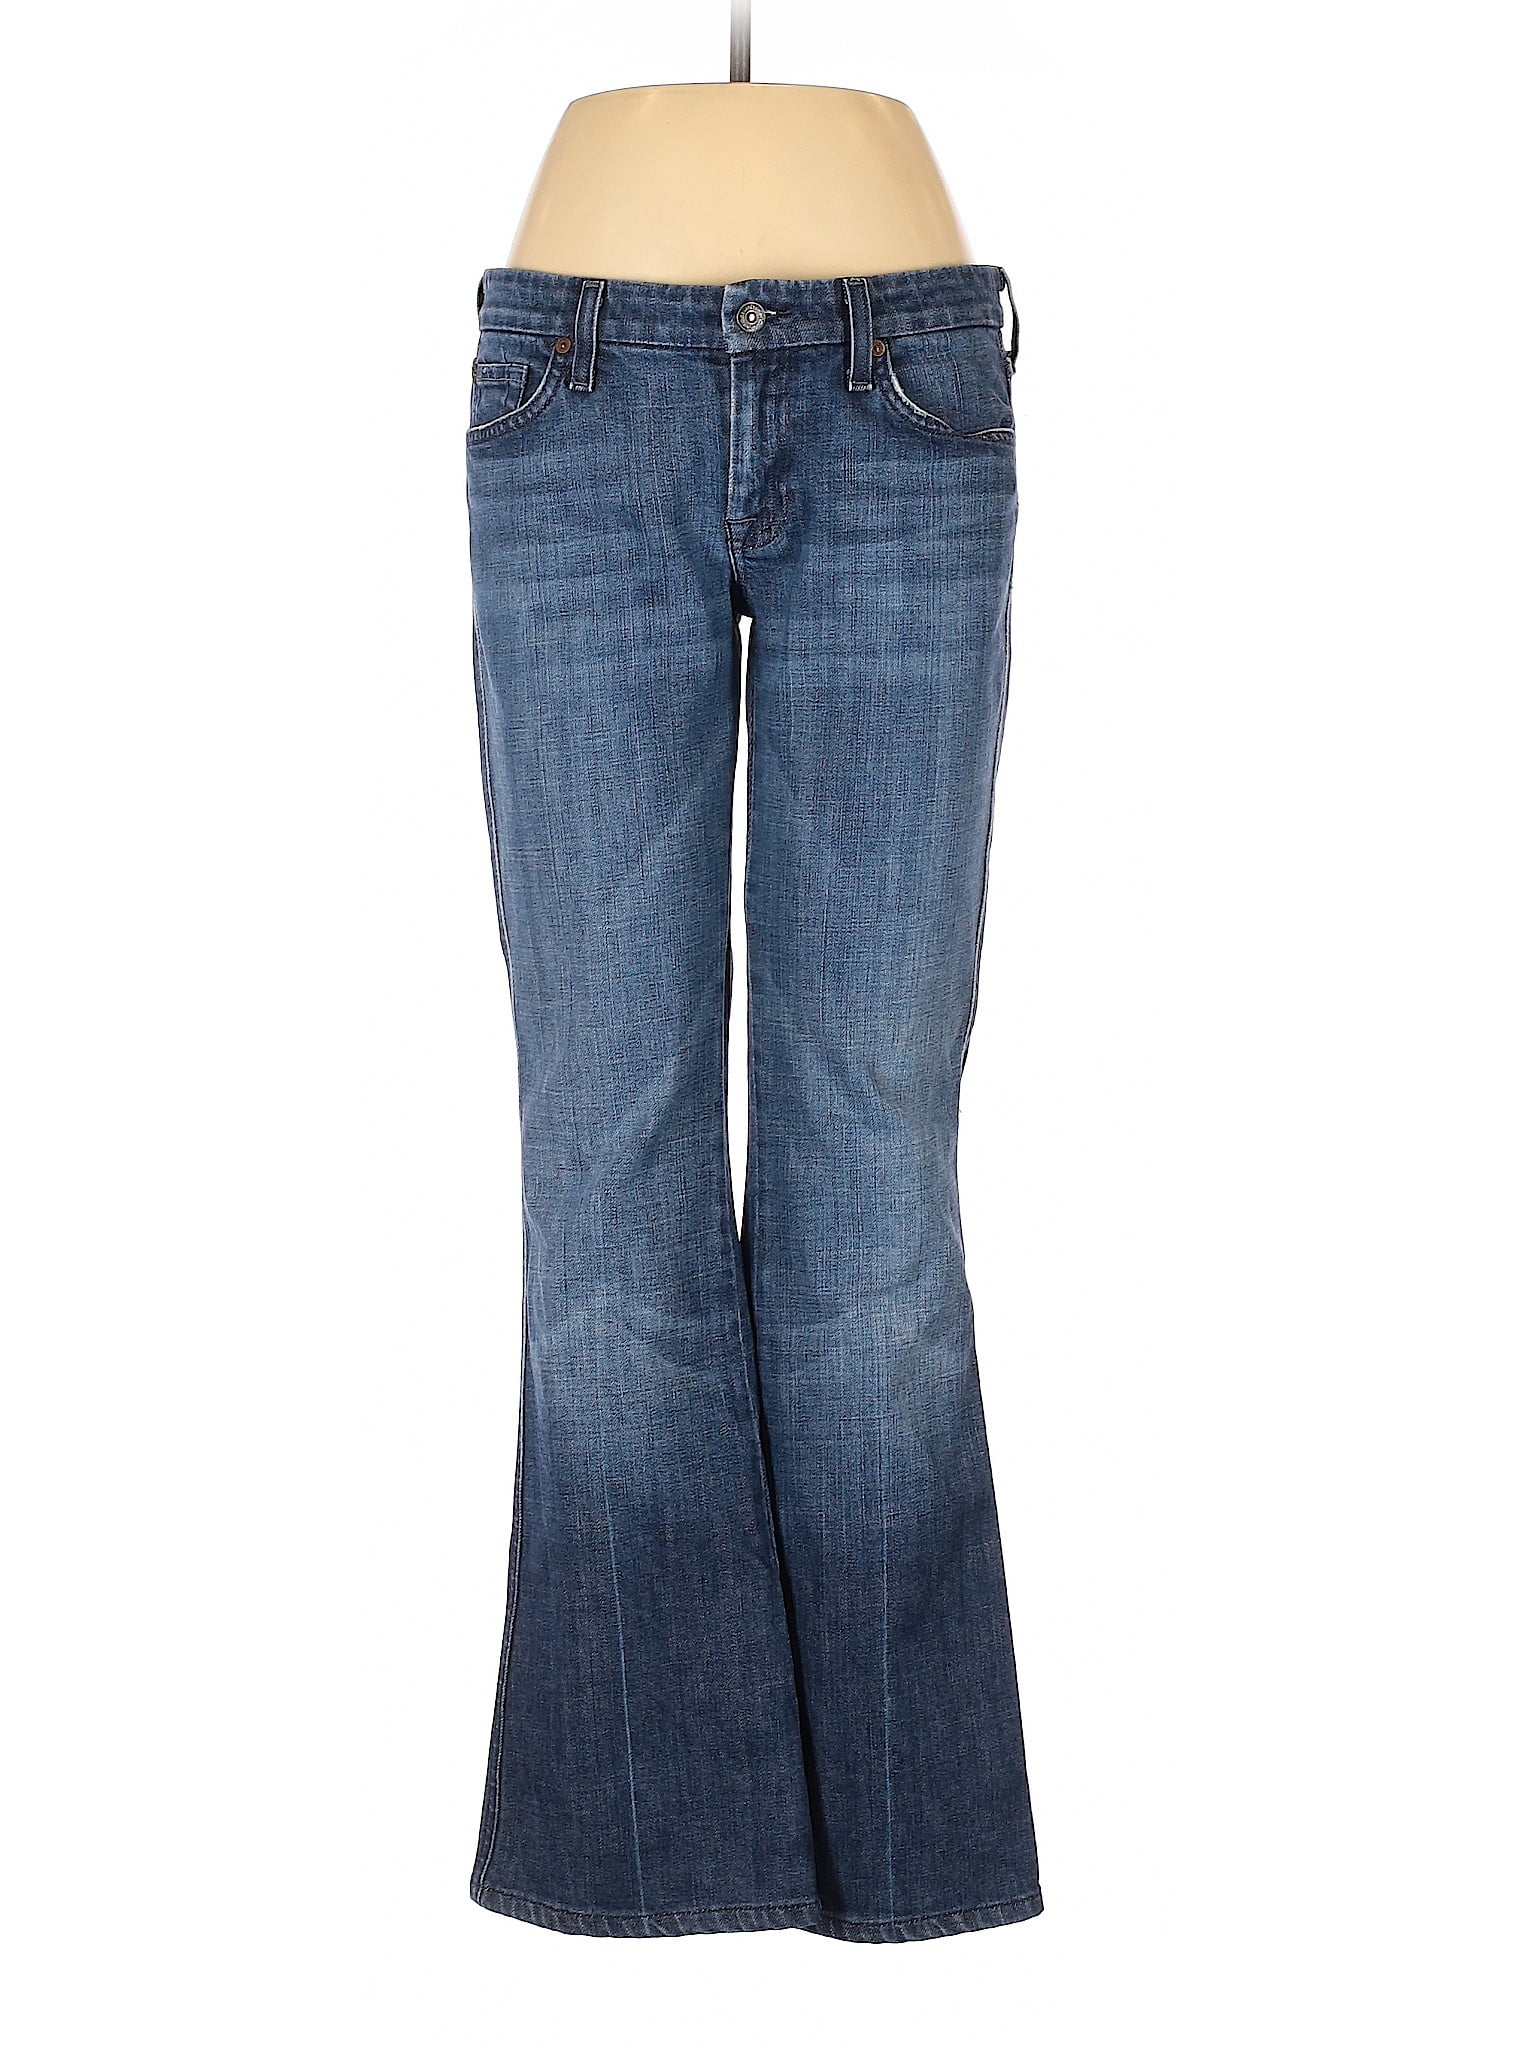 7 For All Mankind - Pre-Owned 7 For All Mankind Women's Size 29W Jeans ...